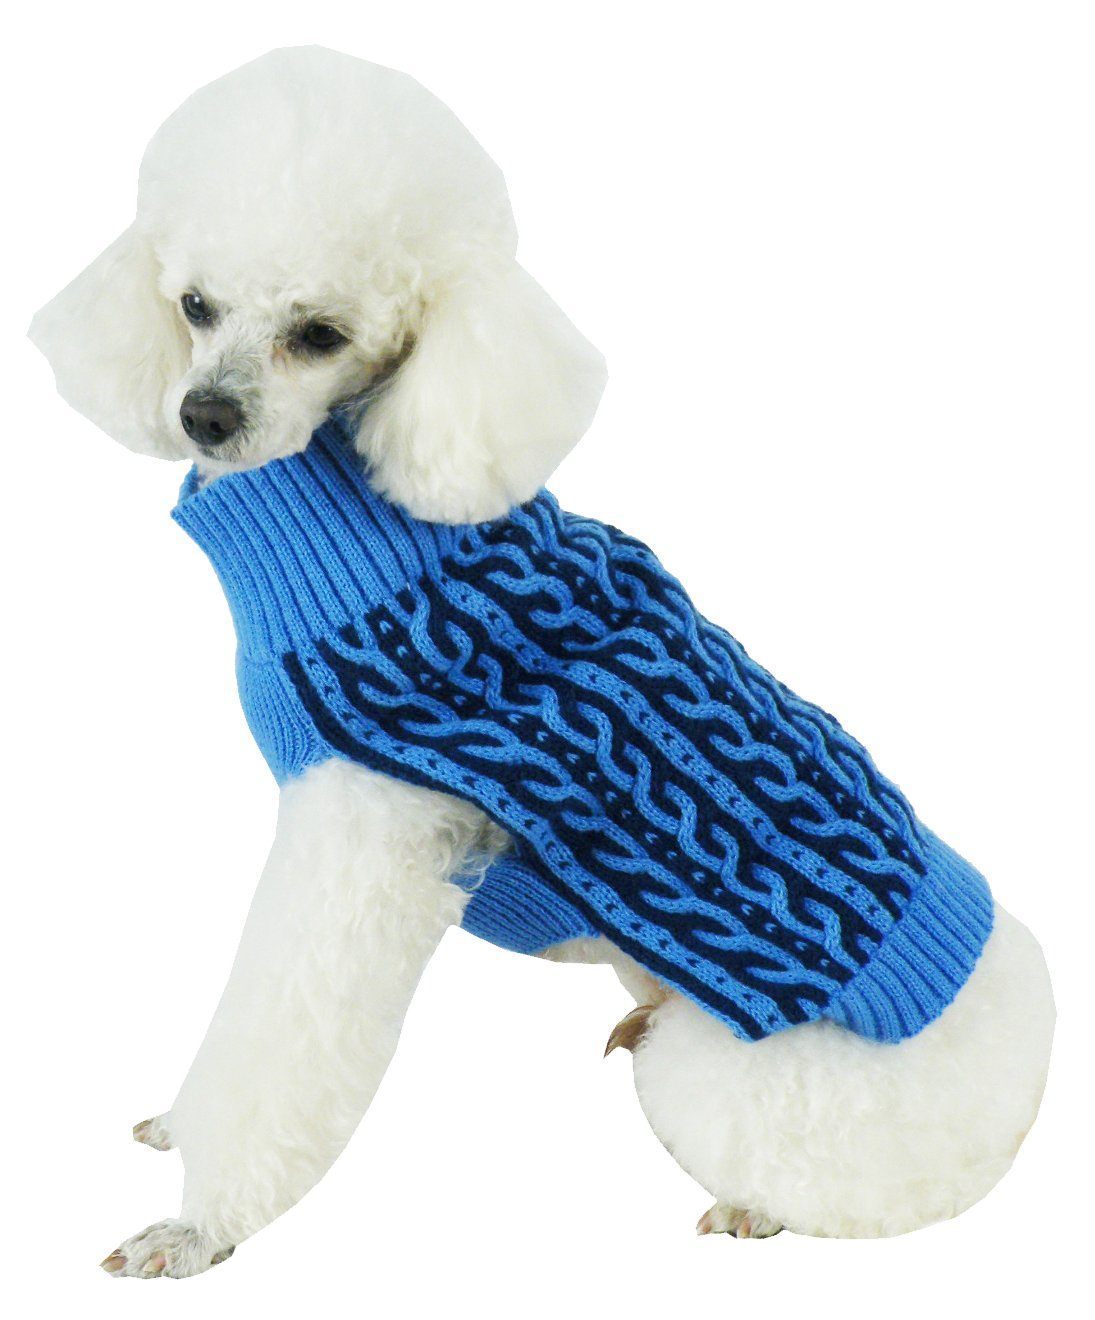 Pet Life ® 'Harmonious' Dual Color Weaved Heavy Cable Knitted Fashion Designer Dog Sweater X-Small Aqua Blue And Dark Blue